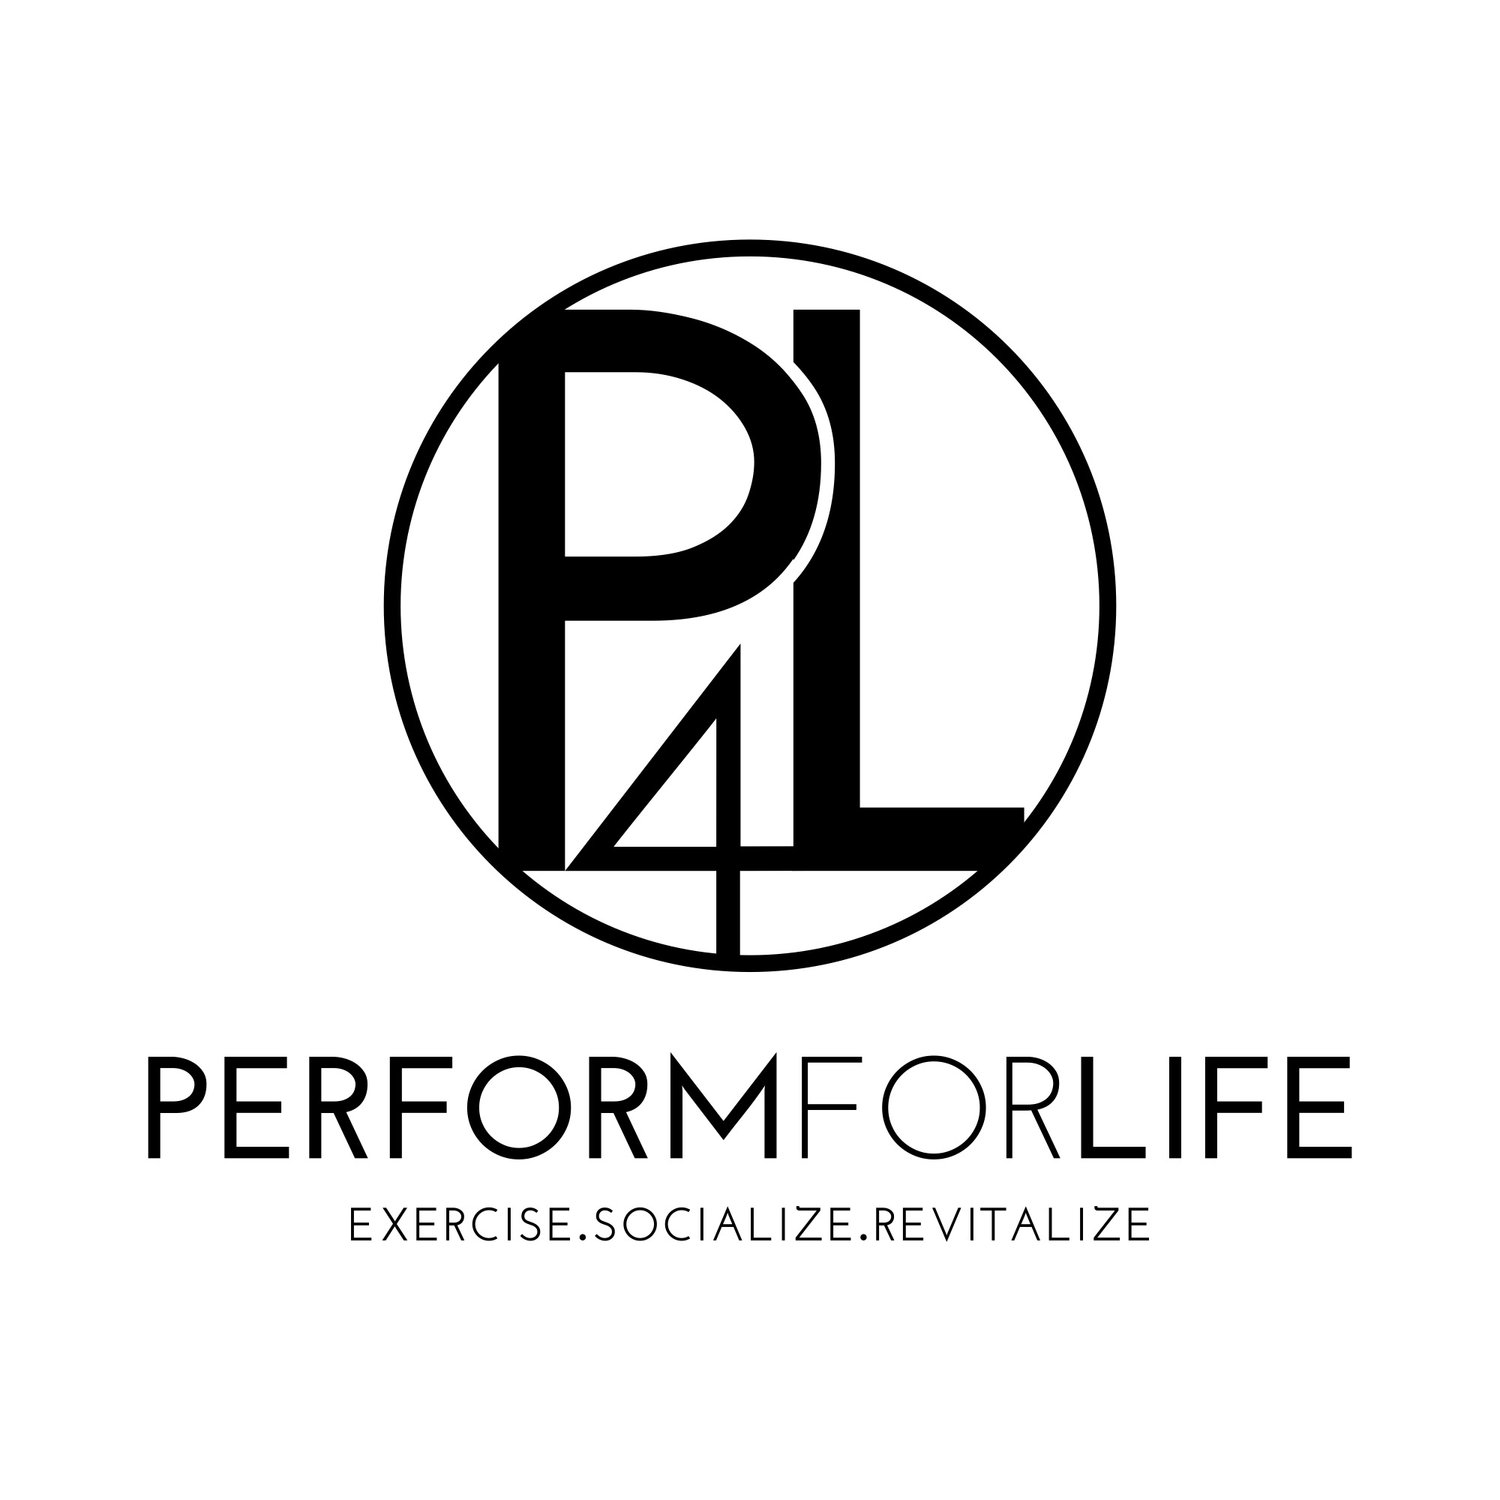 Personal Fitness Trainers in San Francisco | PERFORM FOR LIFE 